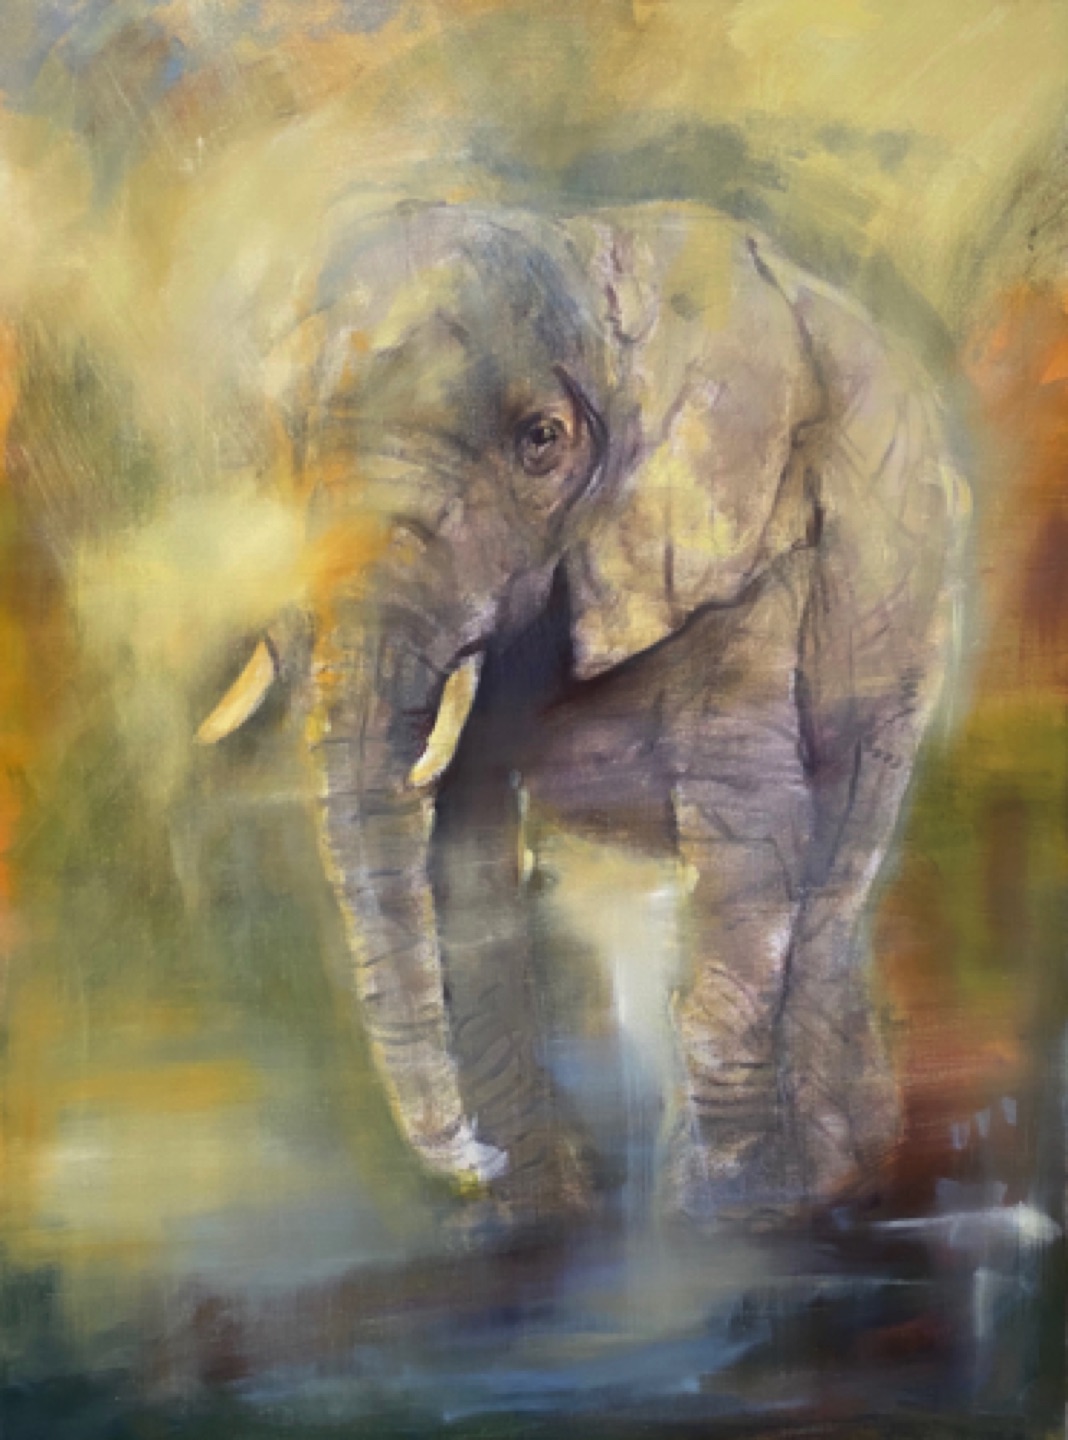 Gregg Chadwick 
When Elephants Weep
 48"x36" oil on linen 2020
Kate Cameron Daum Collection, Crowthorne, United Kingdom 
Sold by Saatchi Art - April 2021